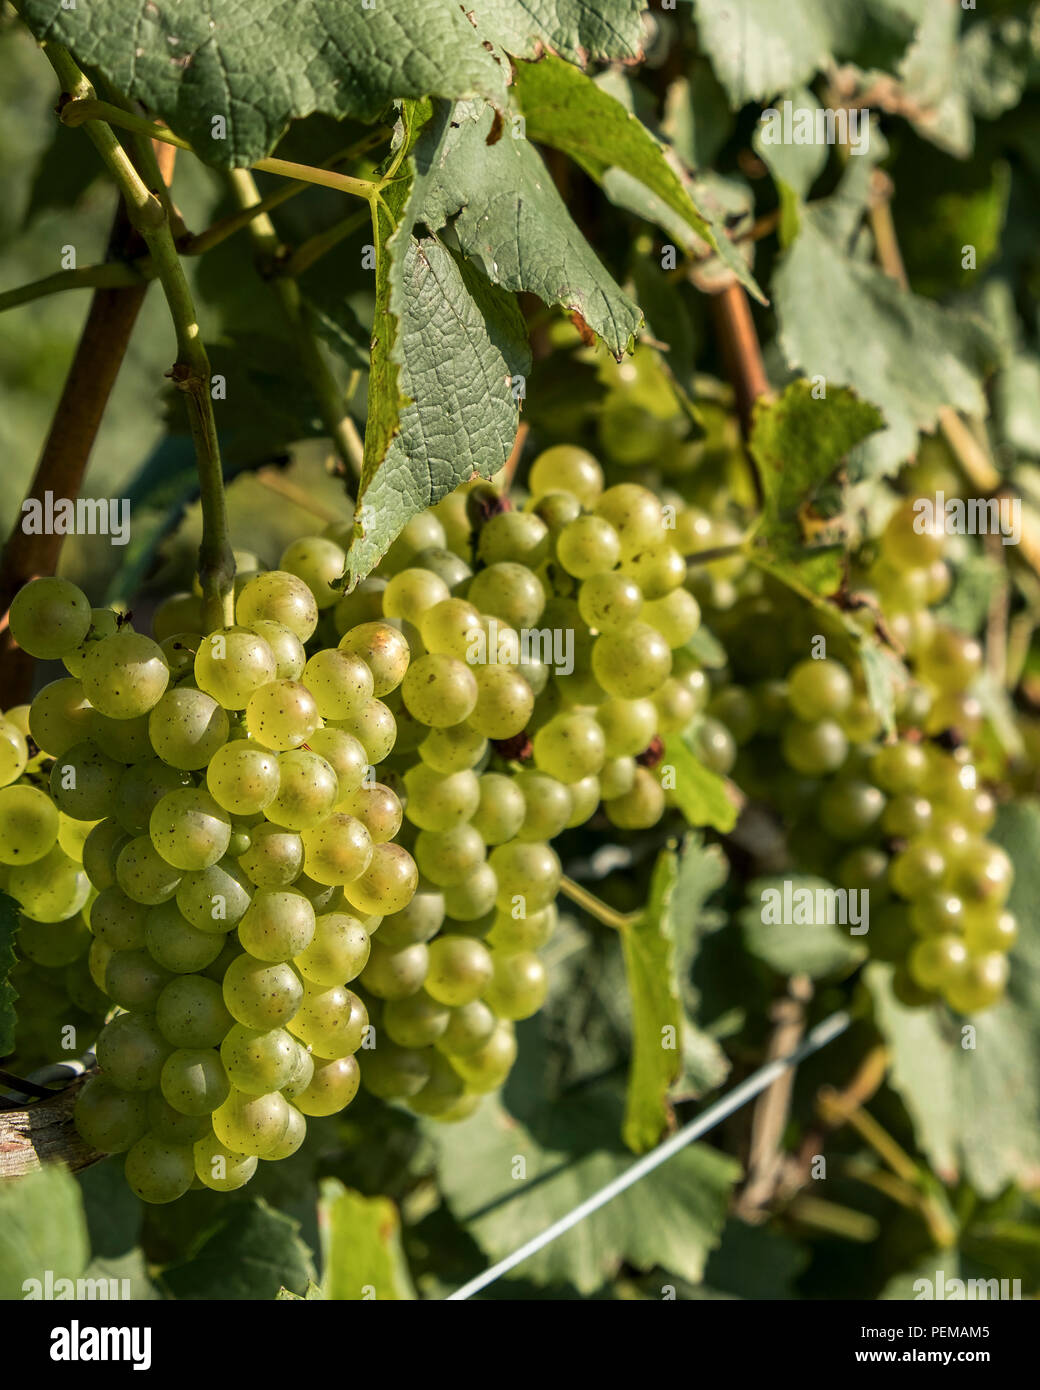 Bunches white wine grapes hang on the vine ready for harvest in a vineyard in Niagara on the Lake Ontario Canada. Stock Photo